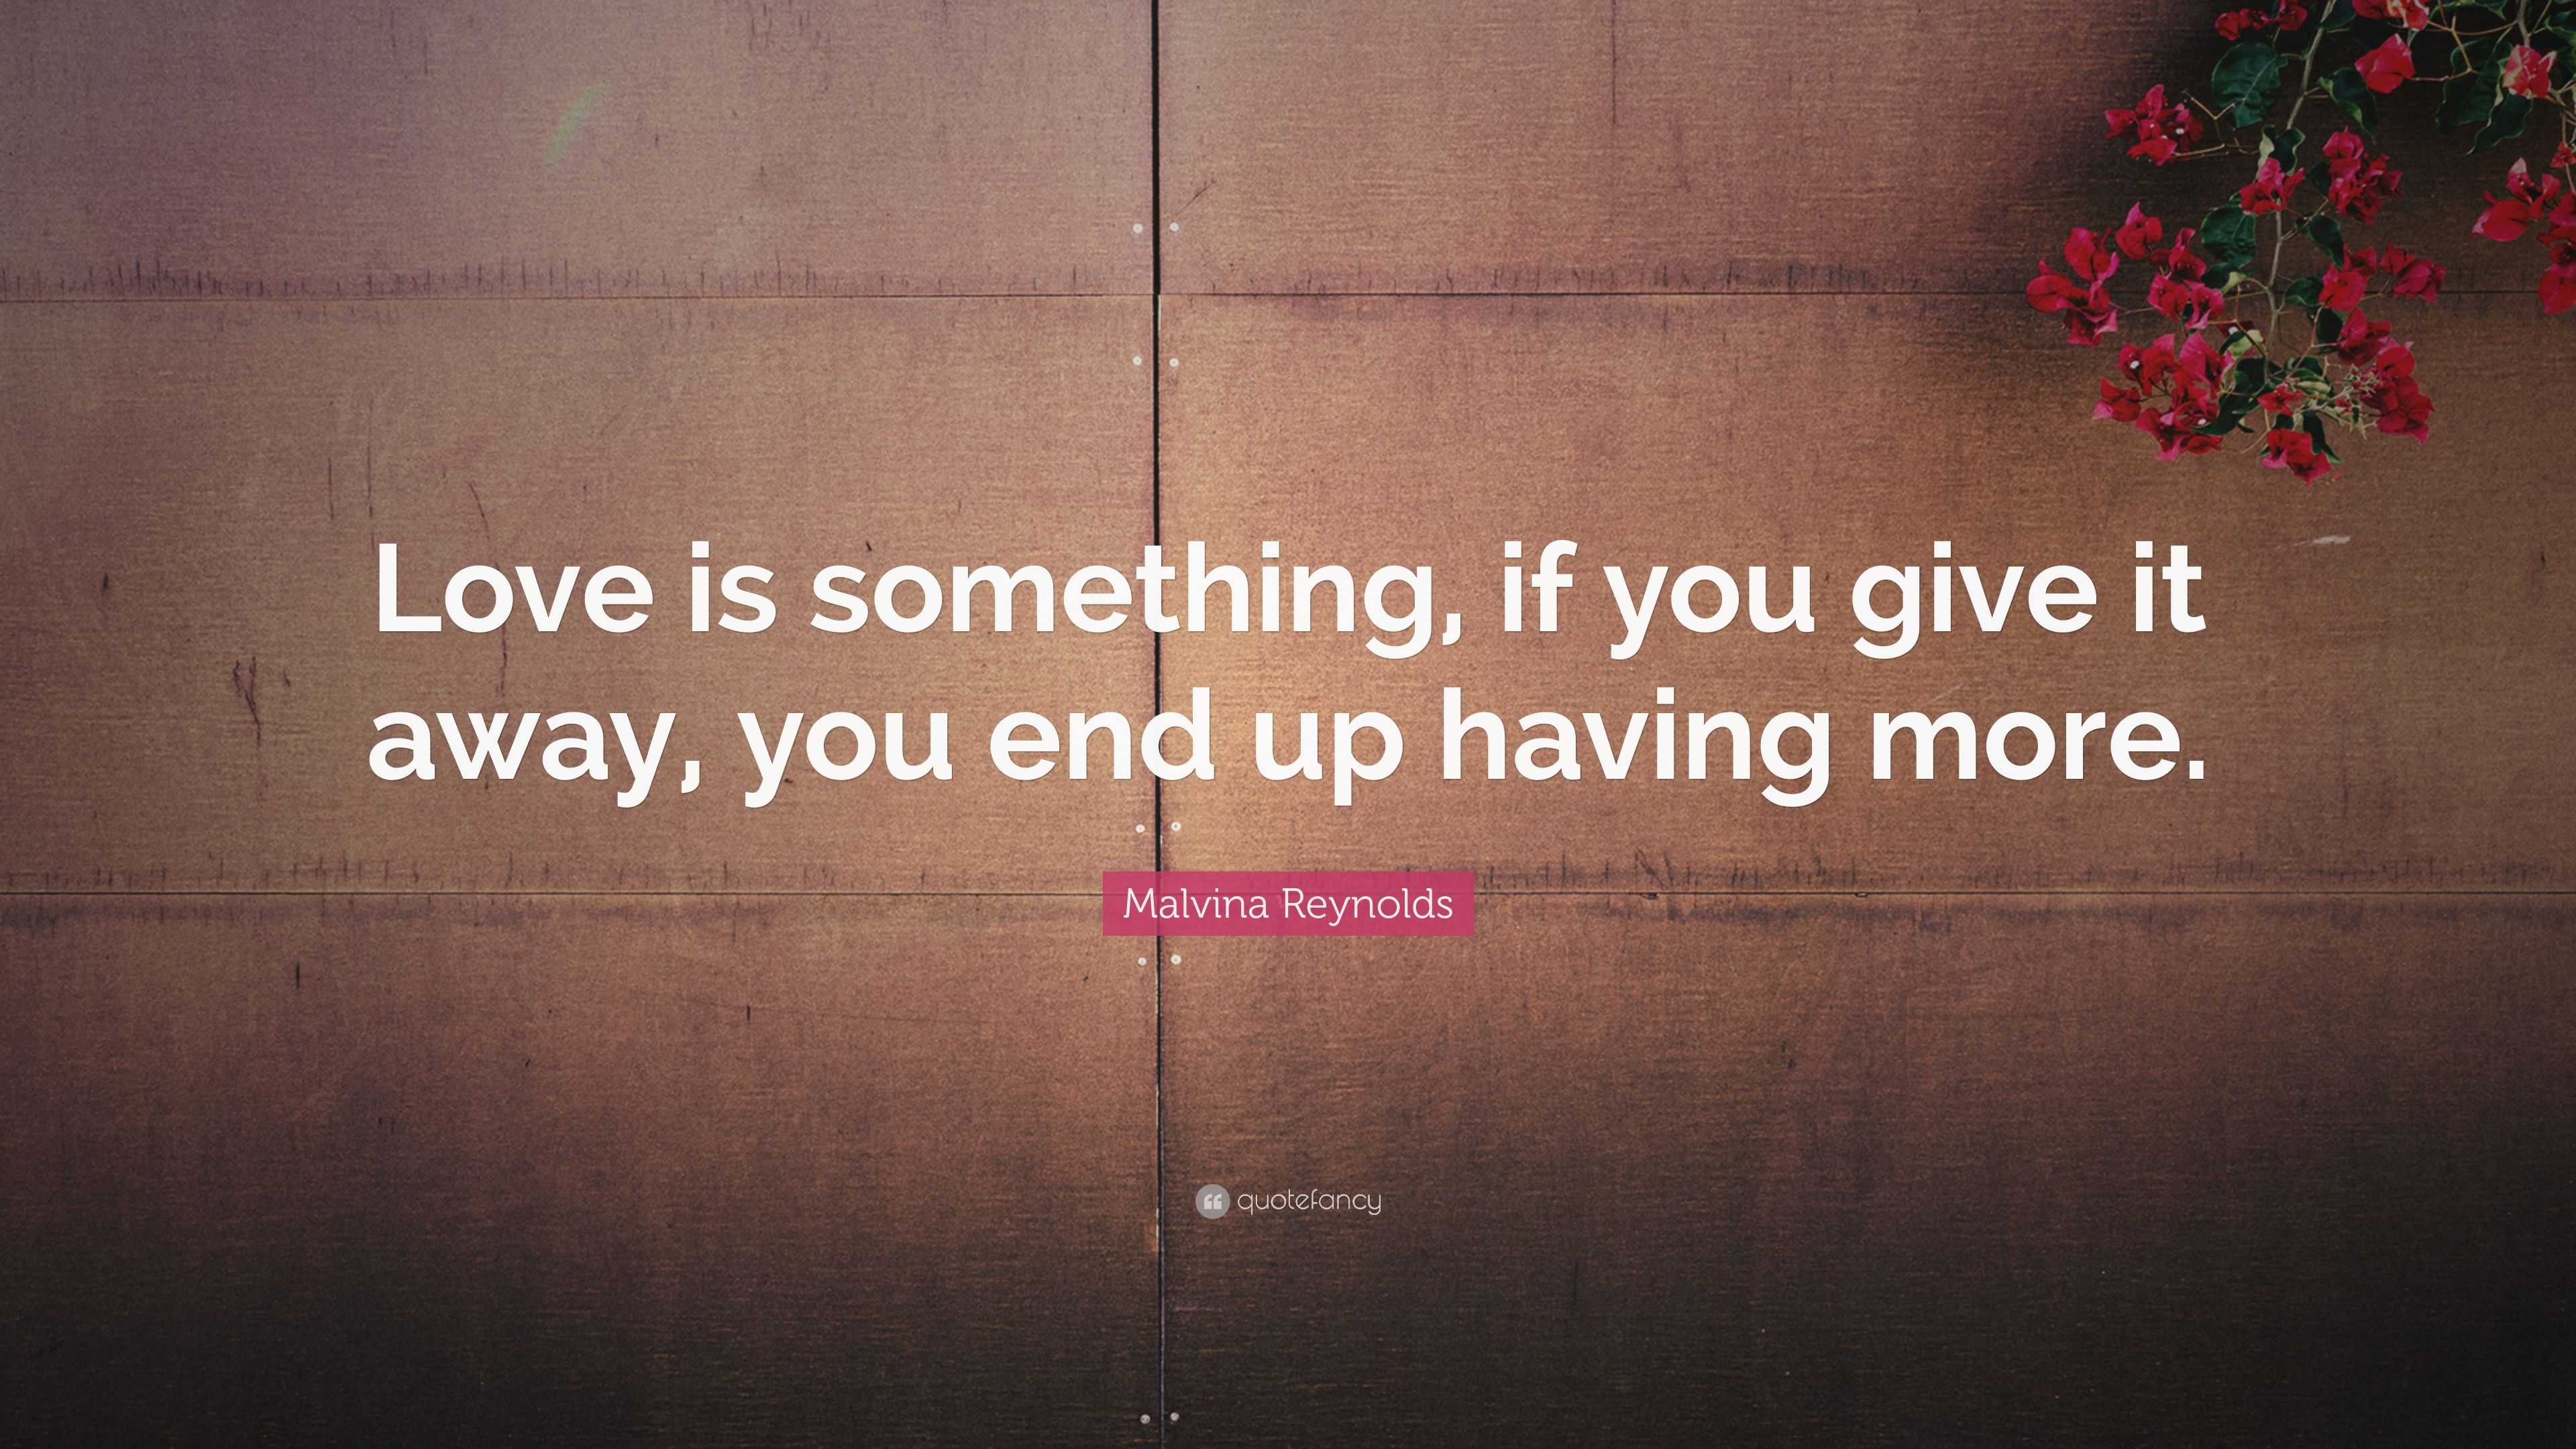 Malvina Reynolds Quote: “Love is something, if you give it away, you ...